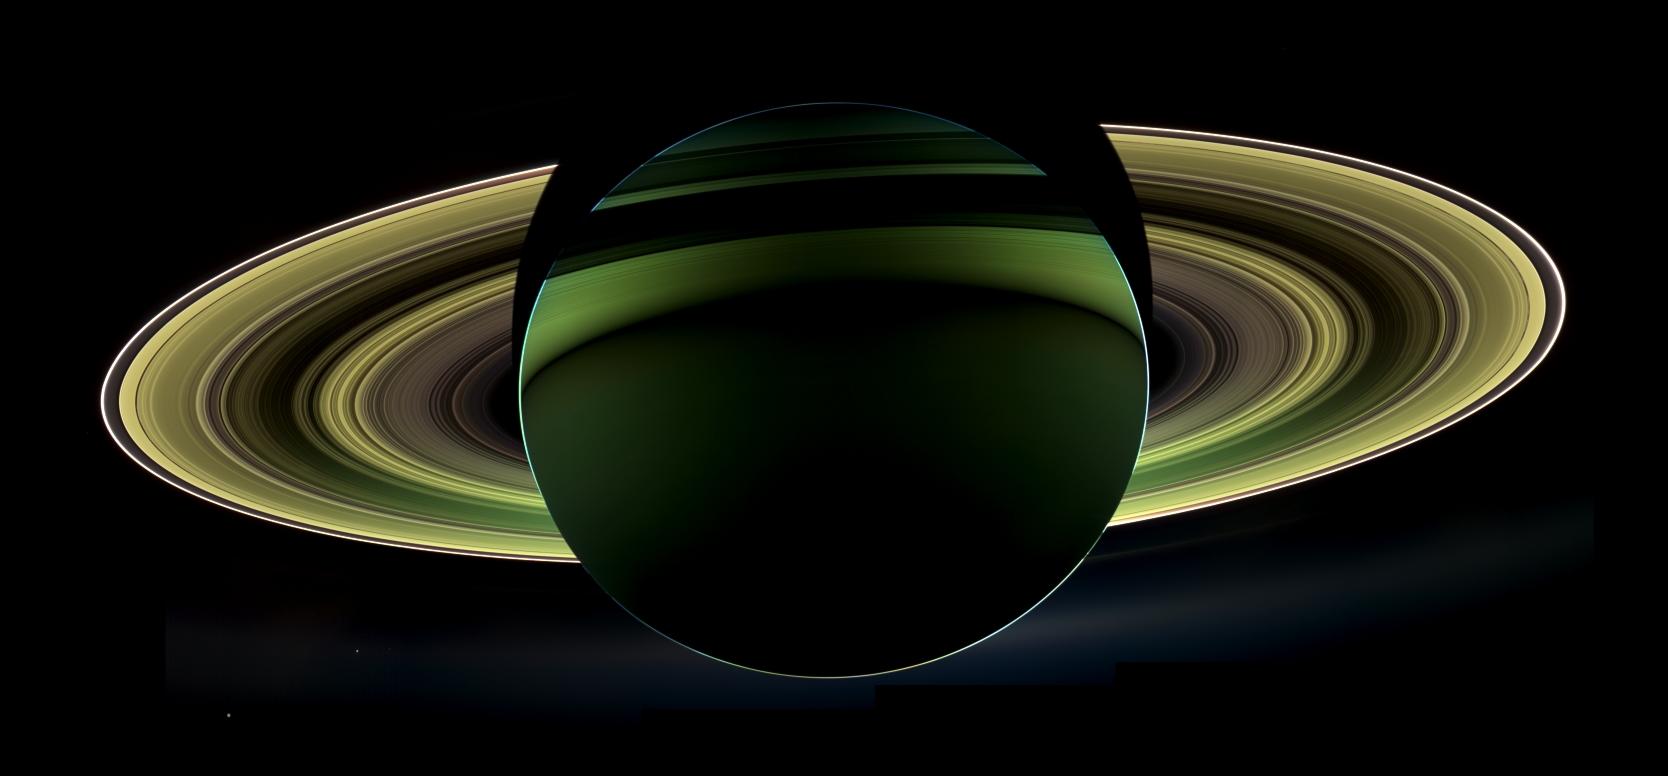 An image of a backlit, green-colored Saturn